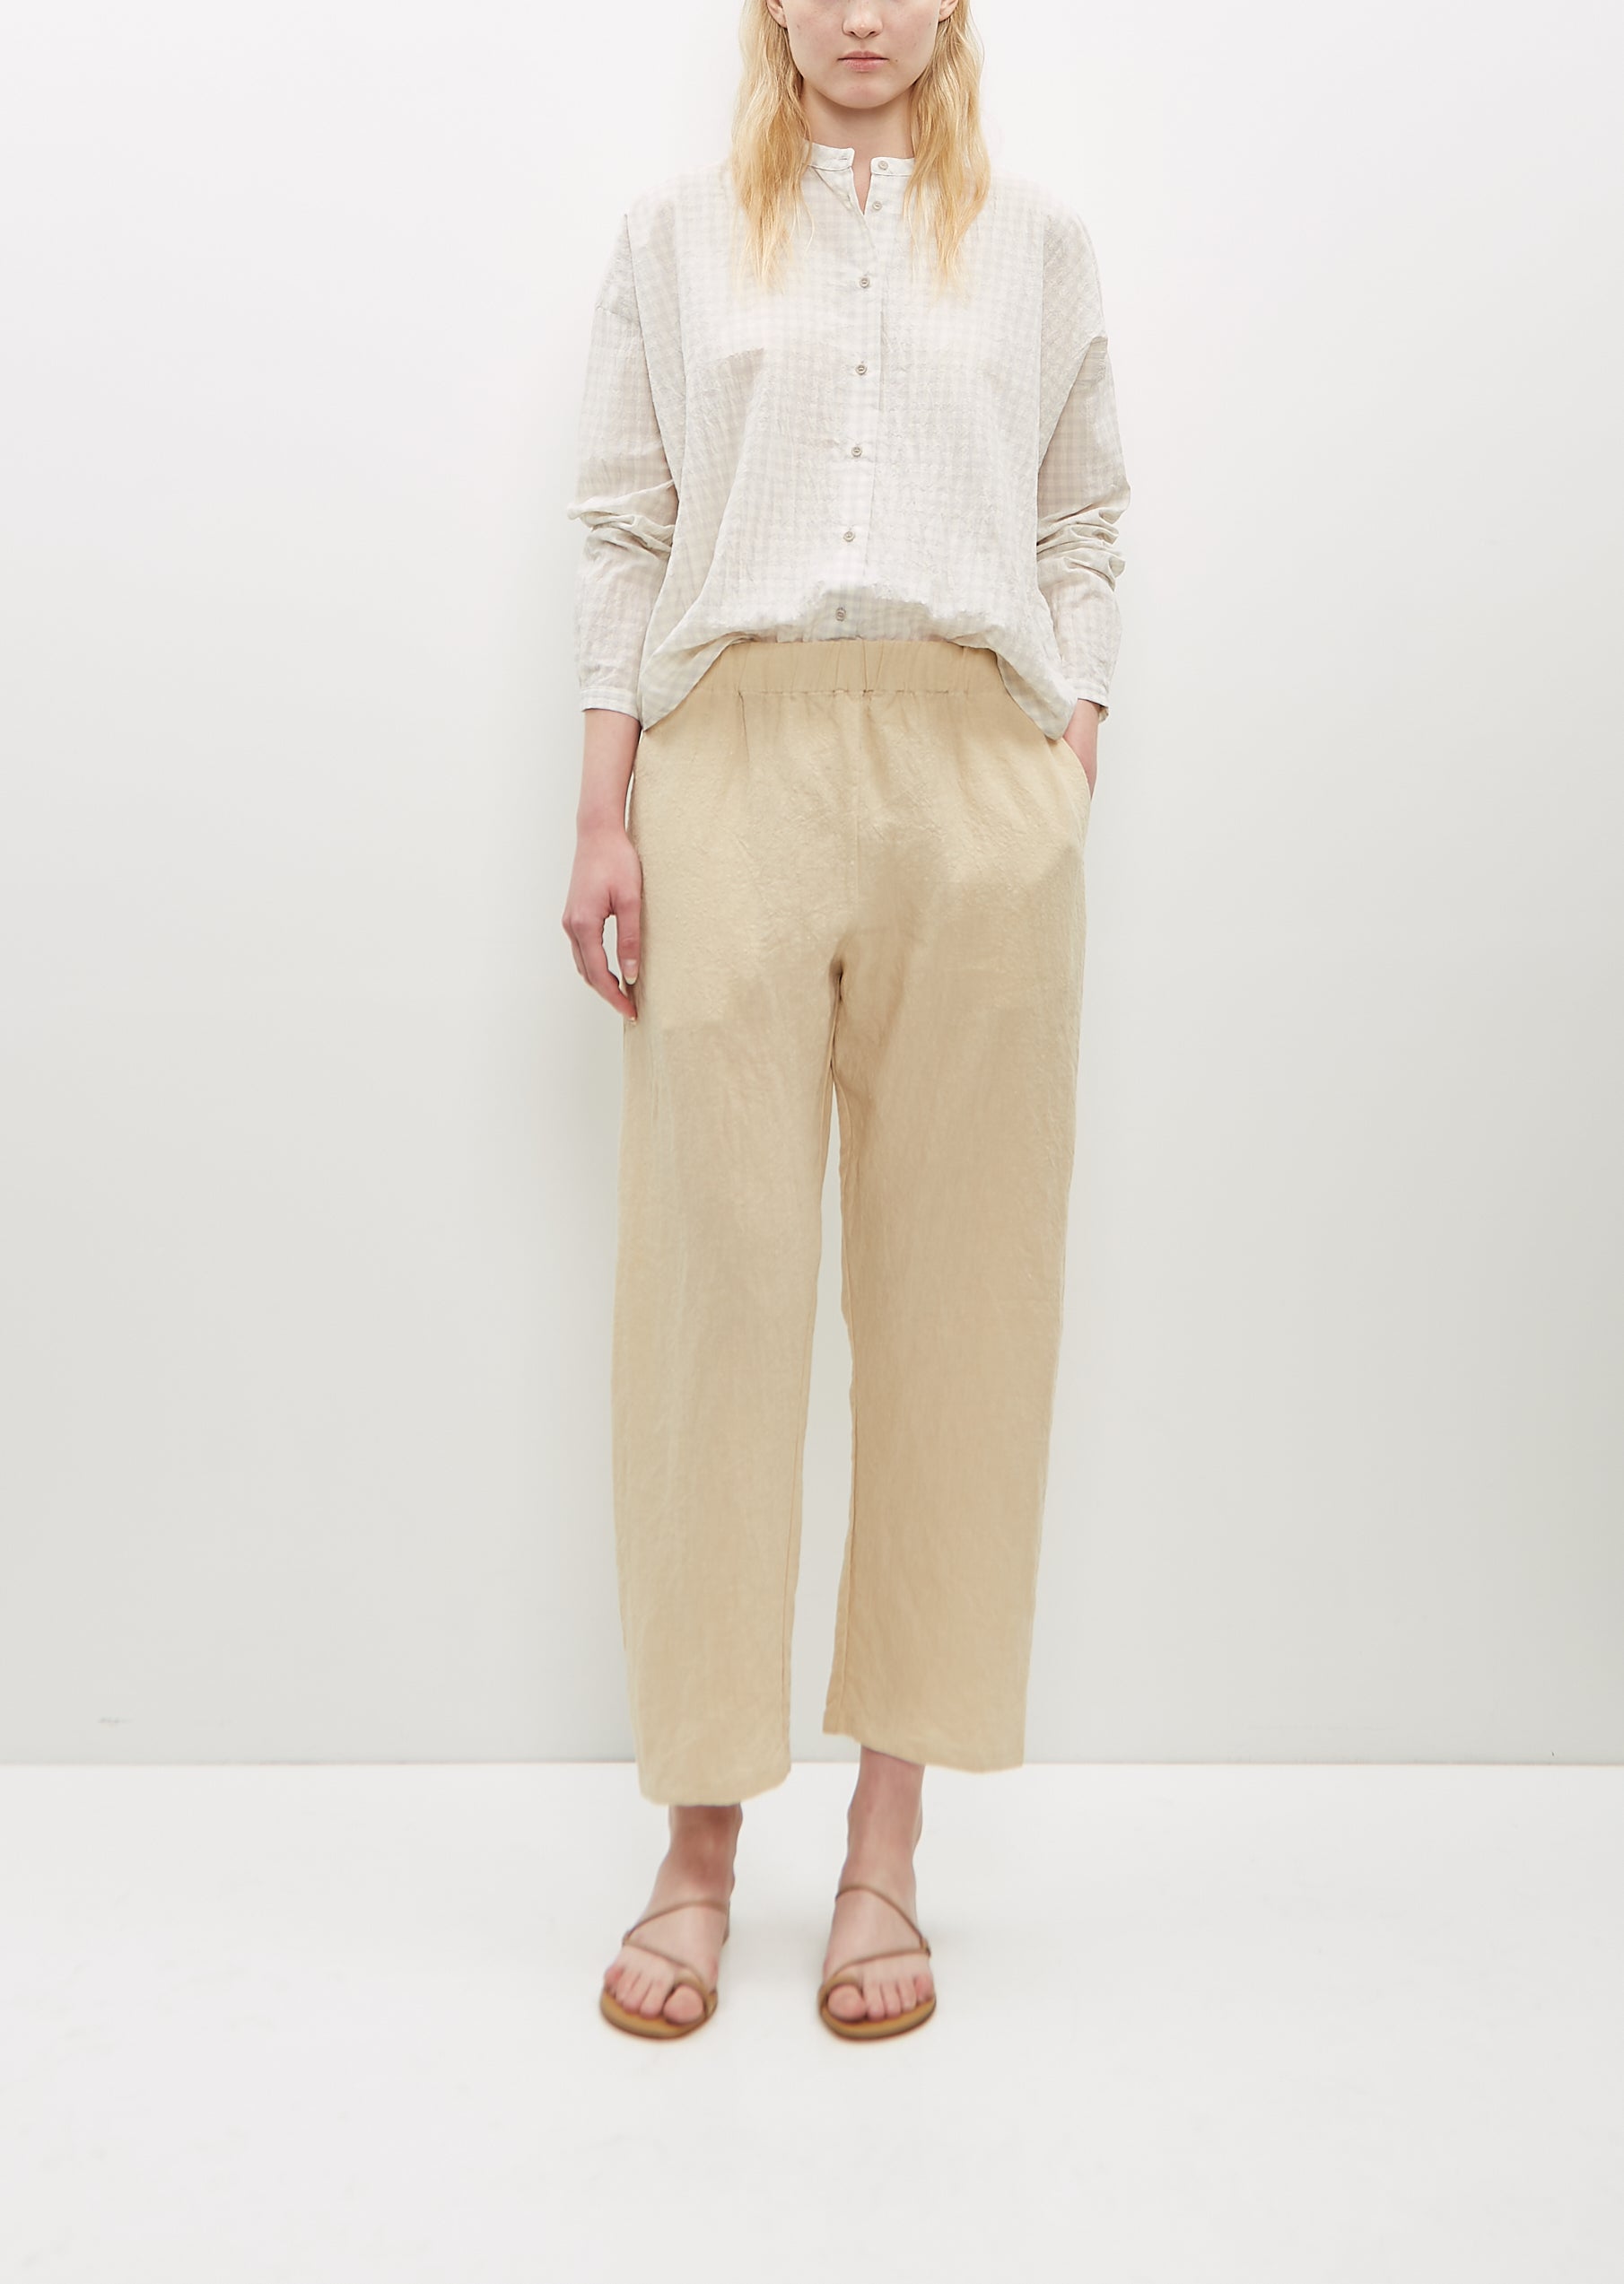 Apuntob Chambray Linen Long Tapered Pullon Pants In Neutral